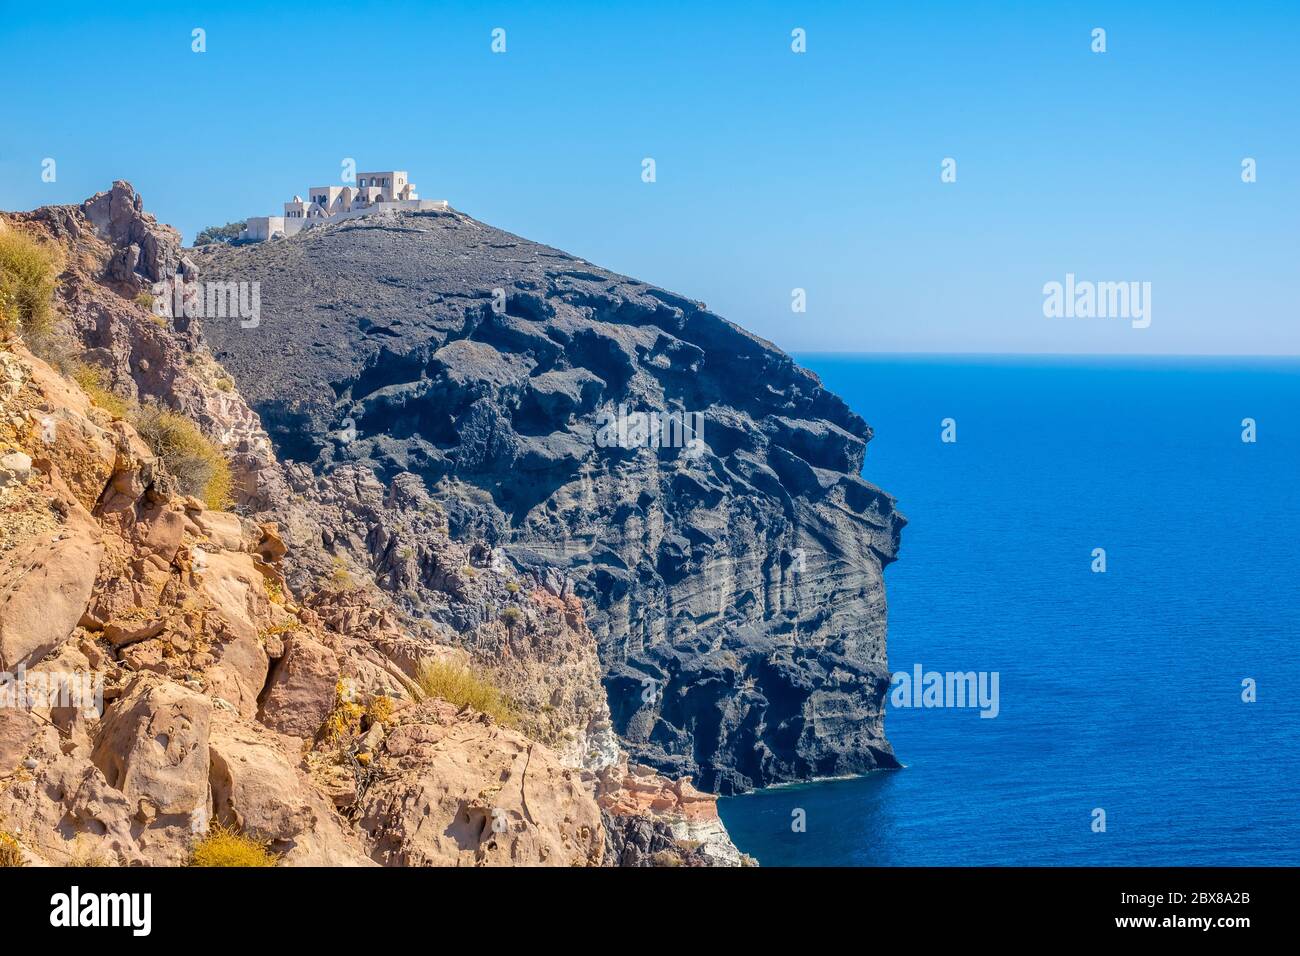 Greece. Sunny summer day on the rocky shore of the Mediterranean Sea. Abandoned hotel construction on top of a blue cliff Stock Photo